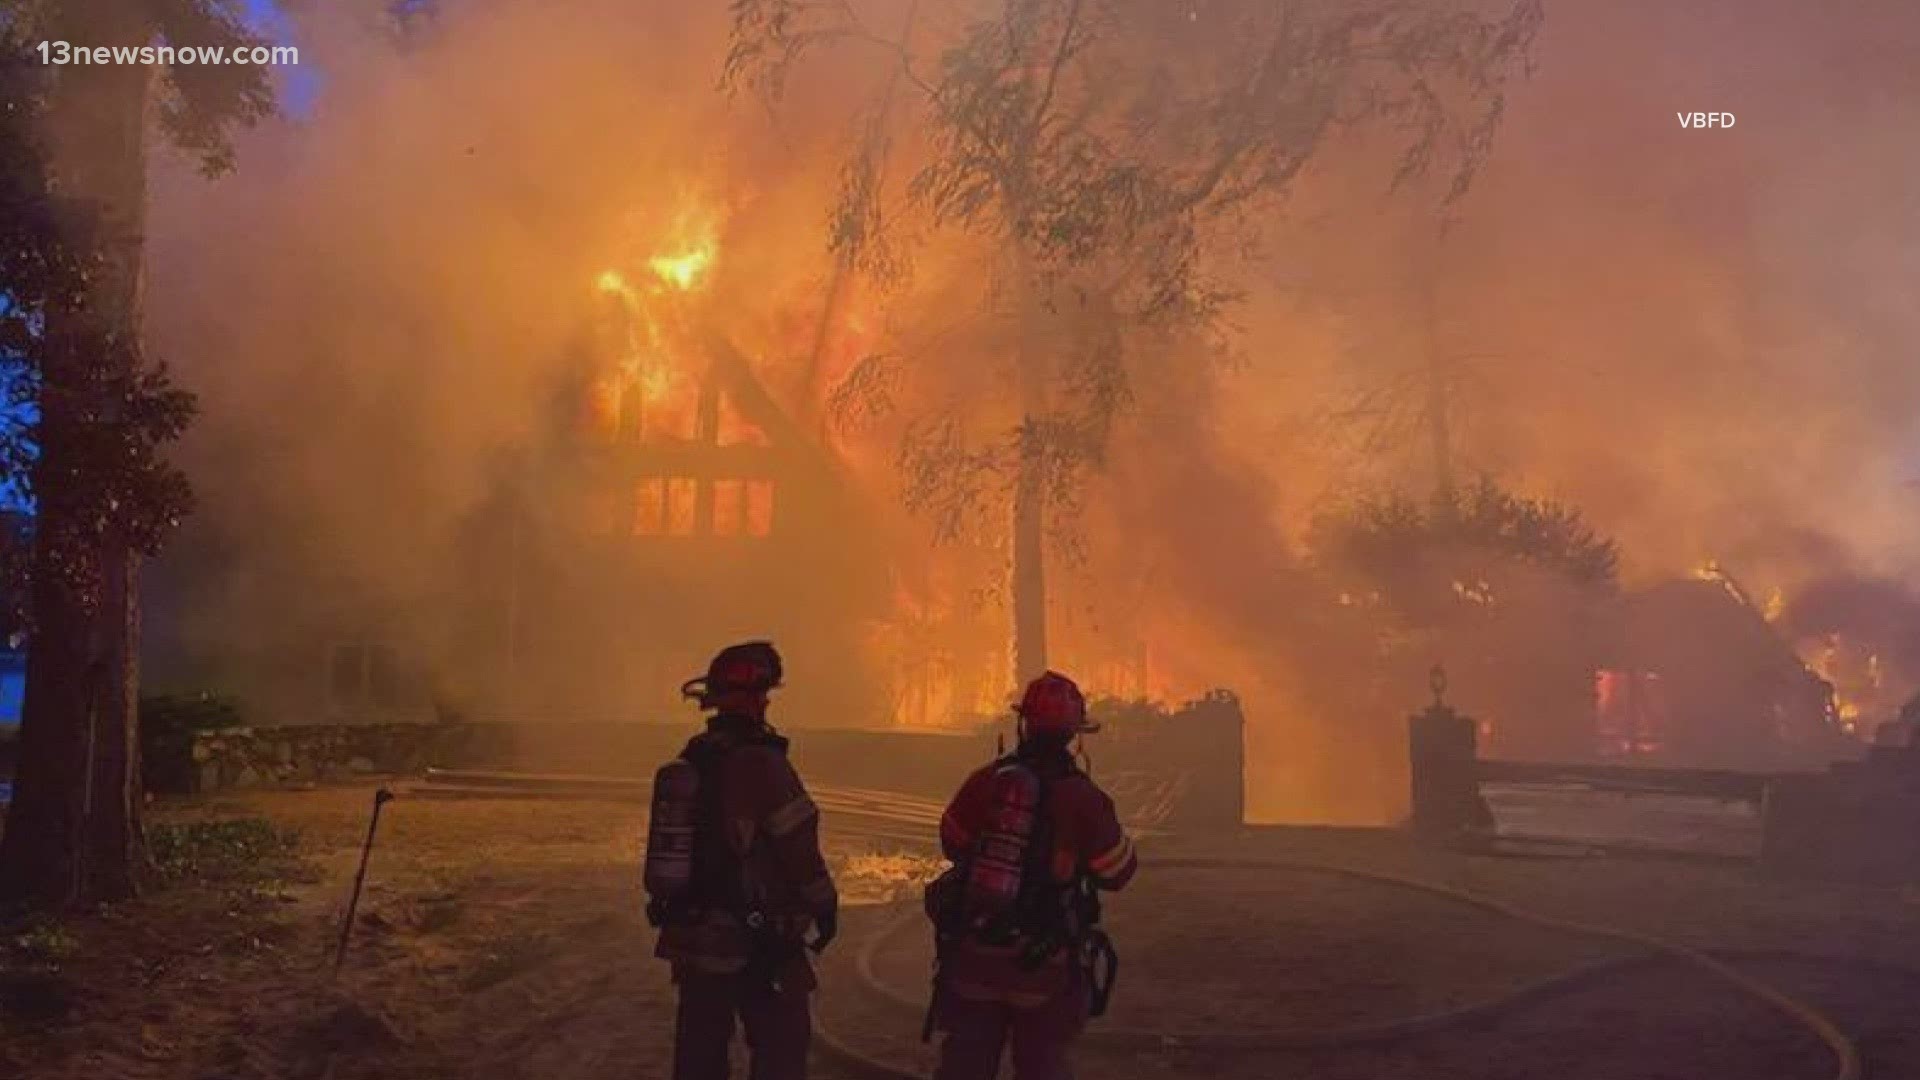 Firefighters in Virginia Beach battled a large blaze that consumed a house on Monday evening.